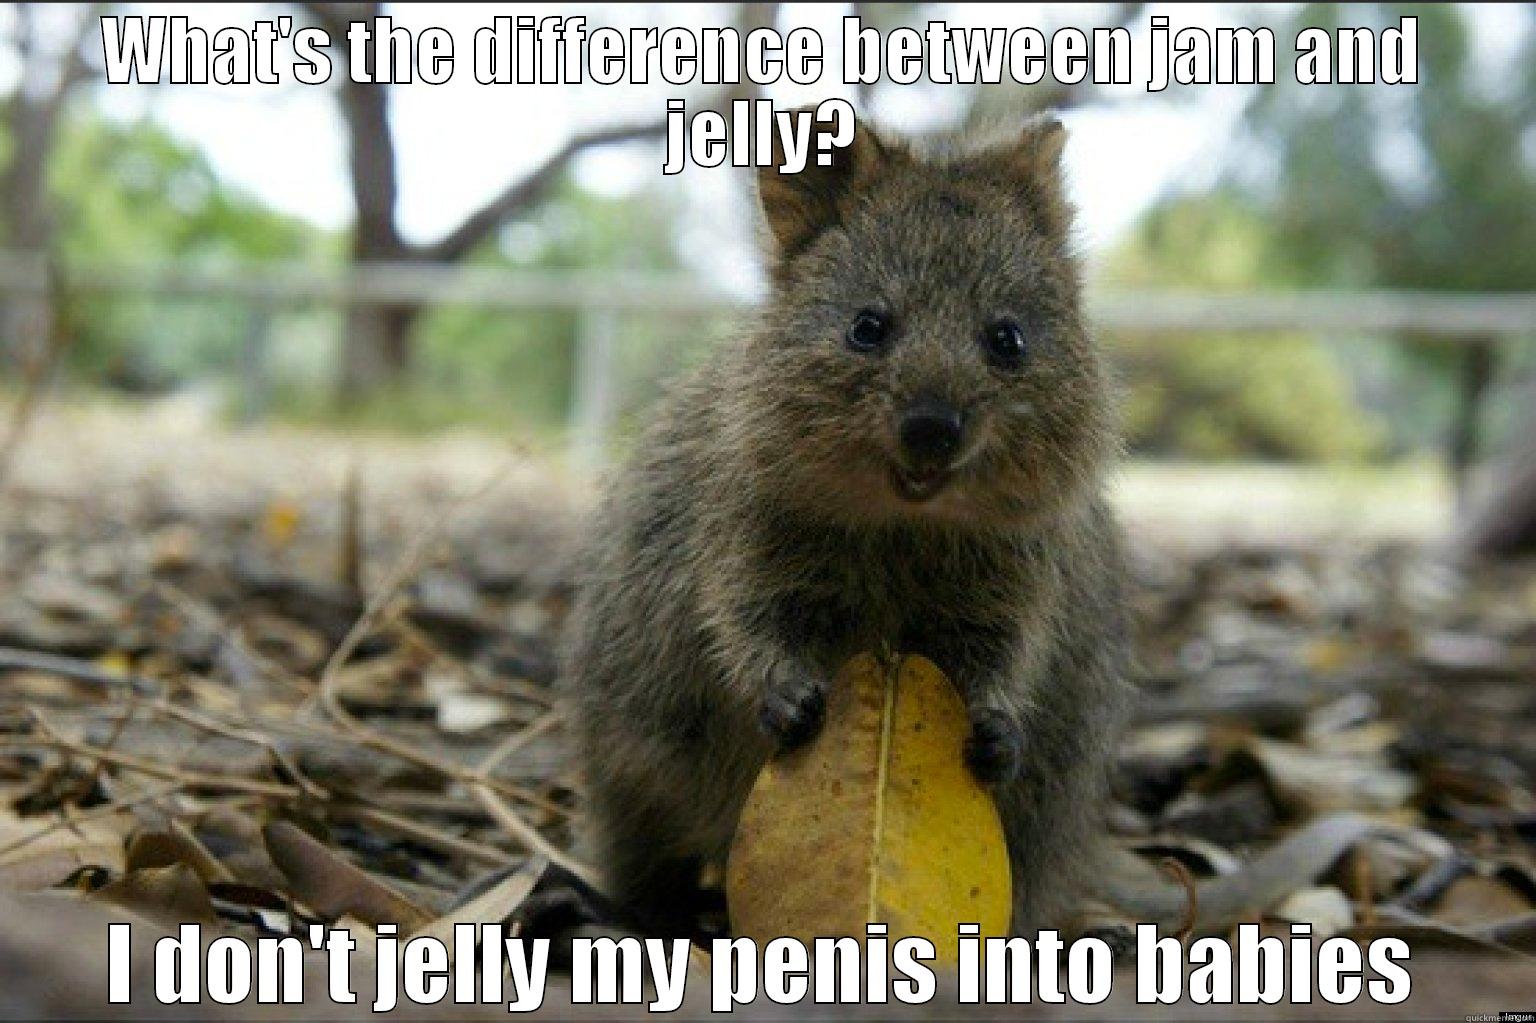 Offensive Joke Quokka - WHAT'S THE DIFFERENCE BETWEEN JAM AND JELLY? I DON'T JELLY MY PENIS INTO BABIES Misc